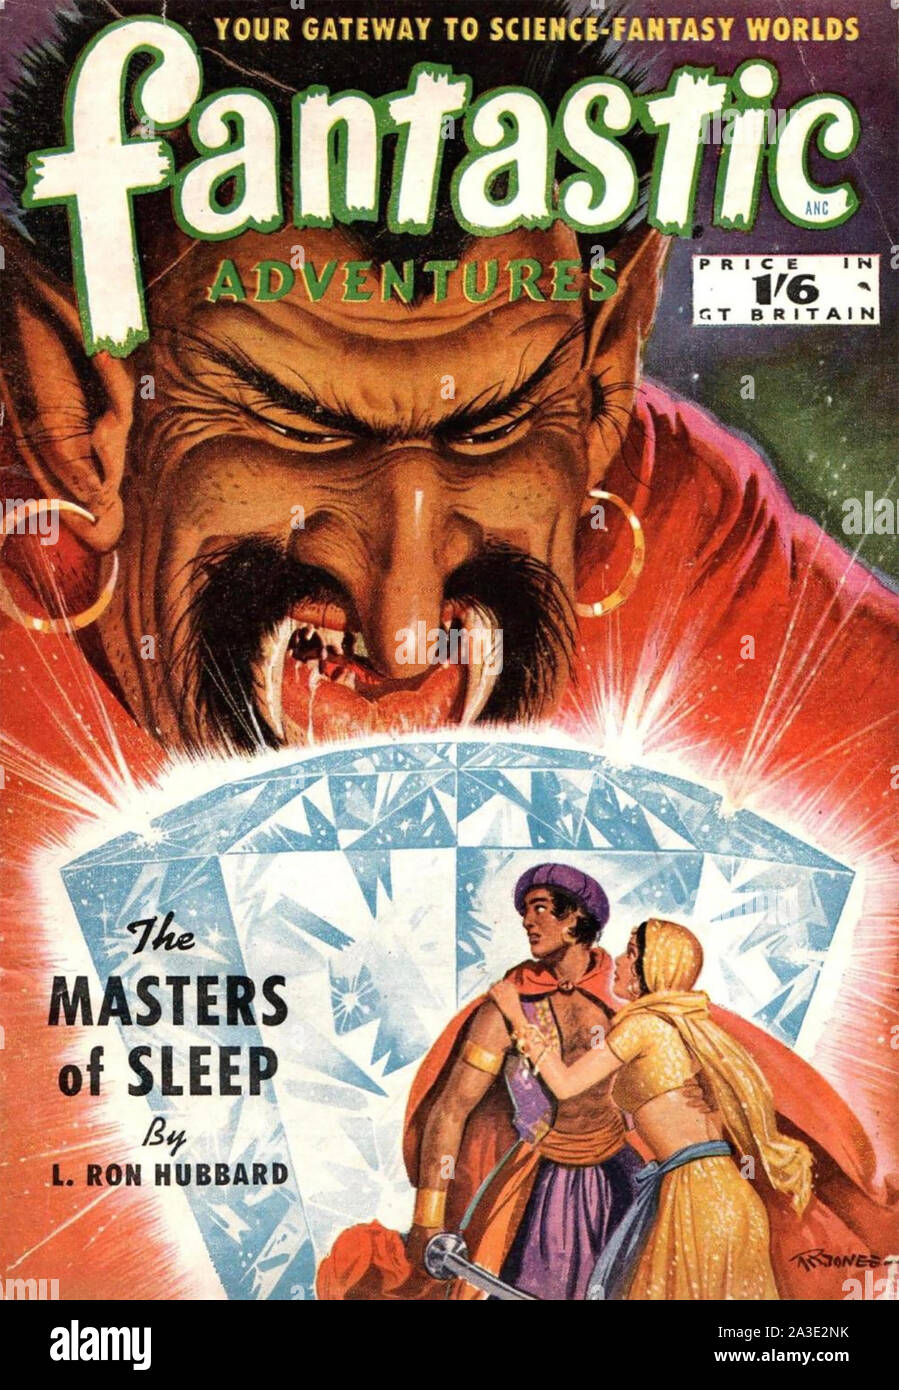 FANTASTIC ADVENTURES UK edition of the American sci-fi magazine with a story by L. Ron Hubbard. 1952. Stock Photo